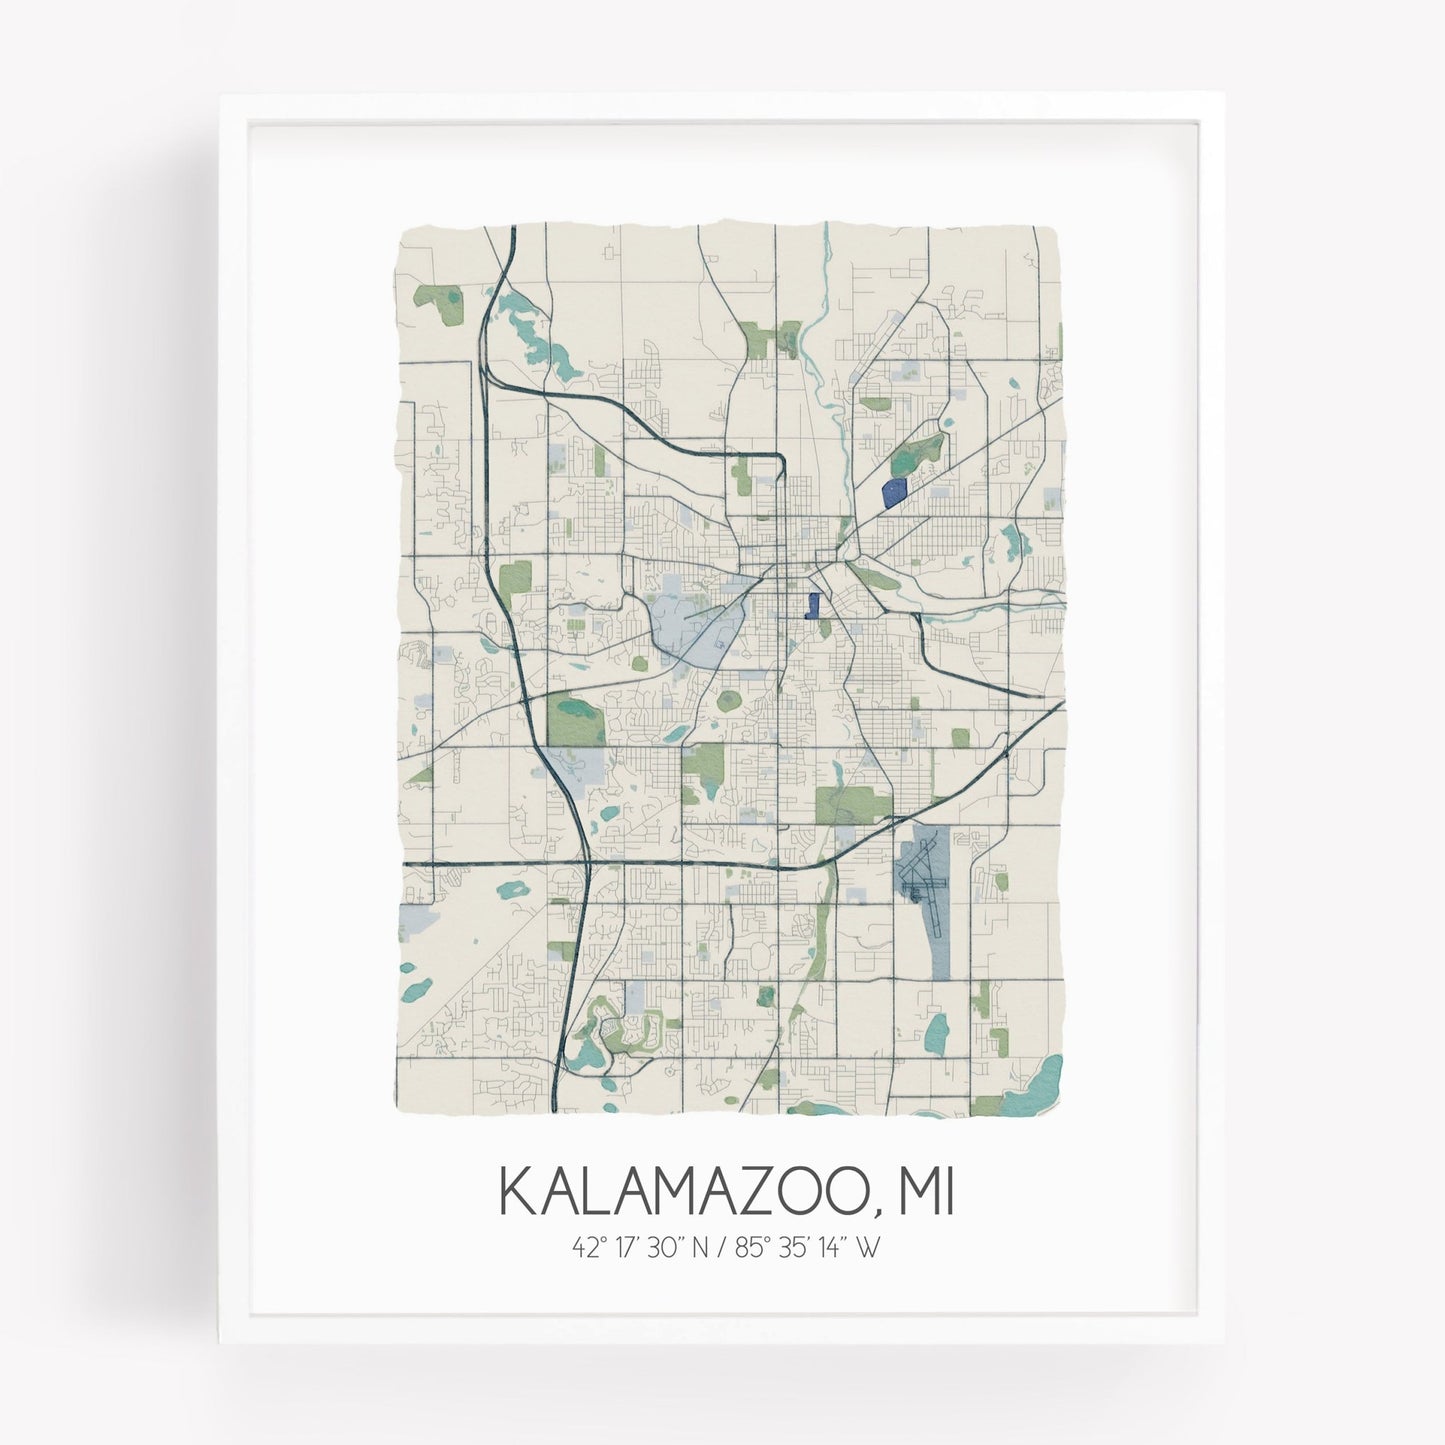 A city map print of Kalamazoo Michigan, in the color beige